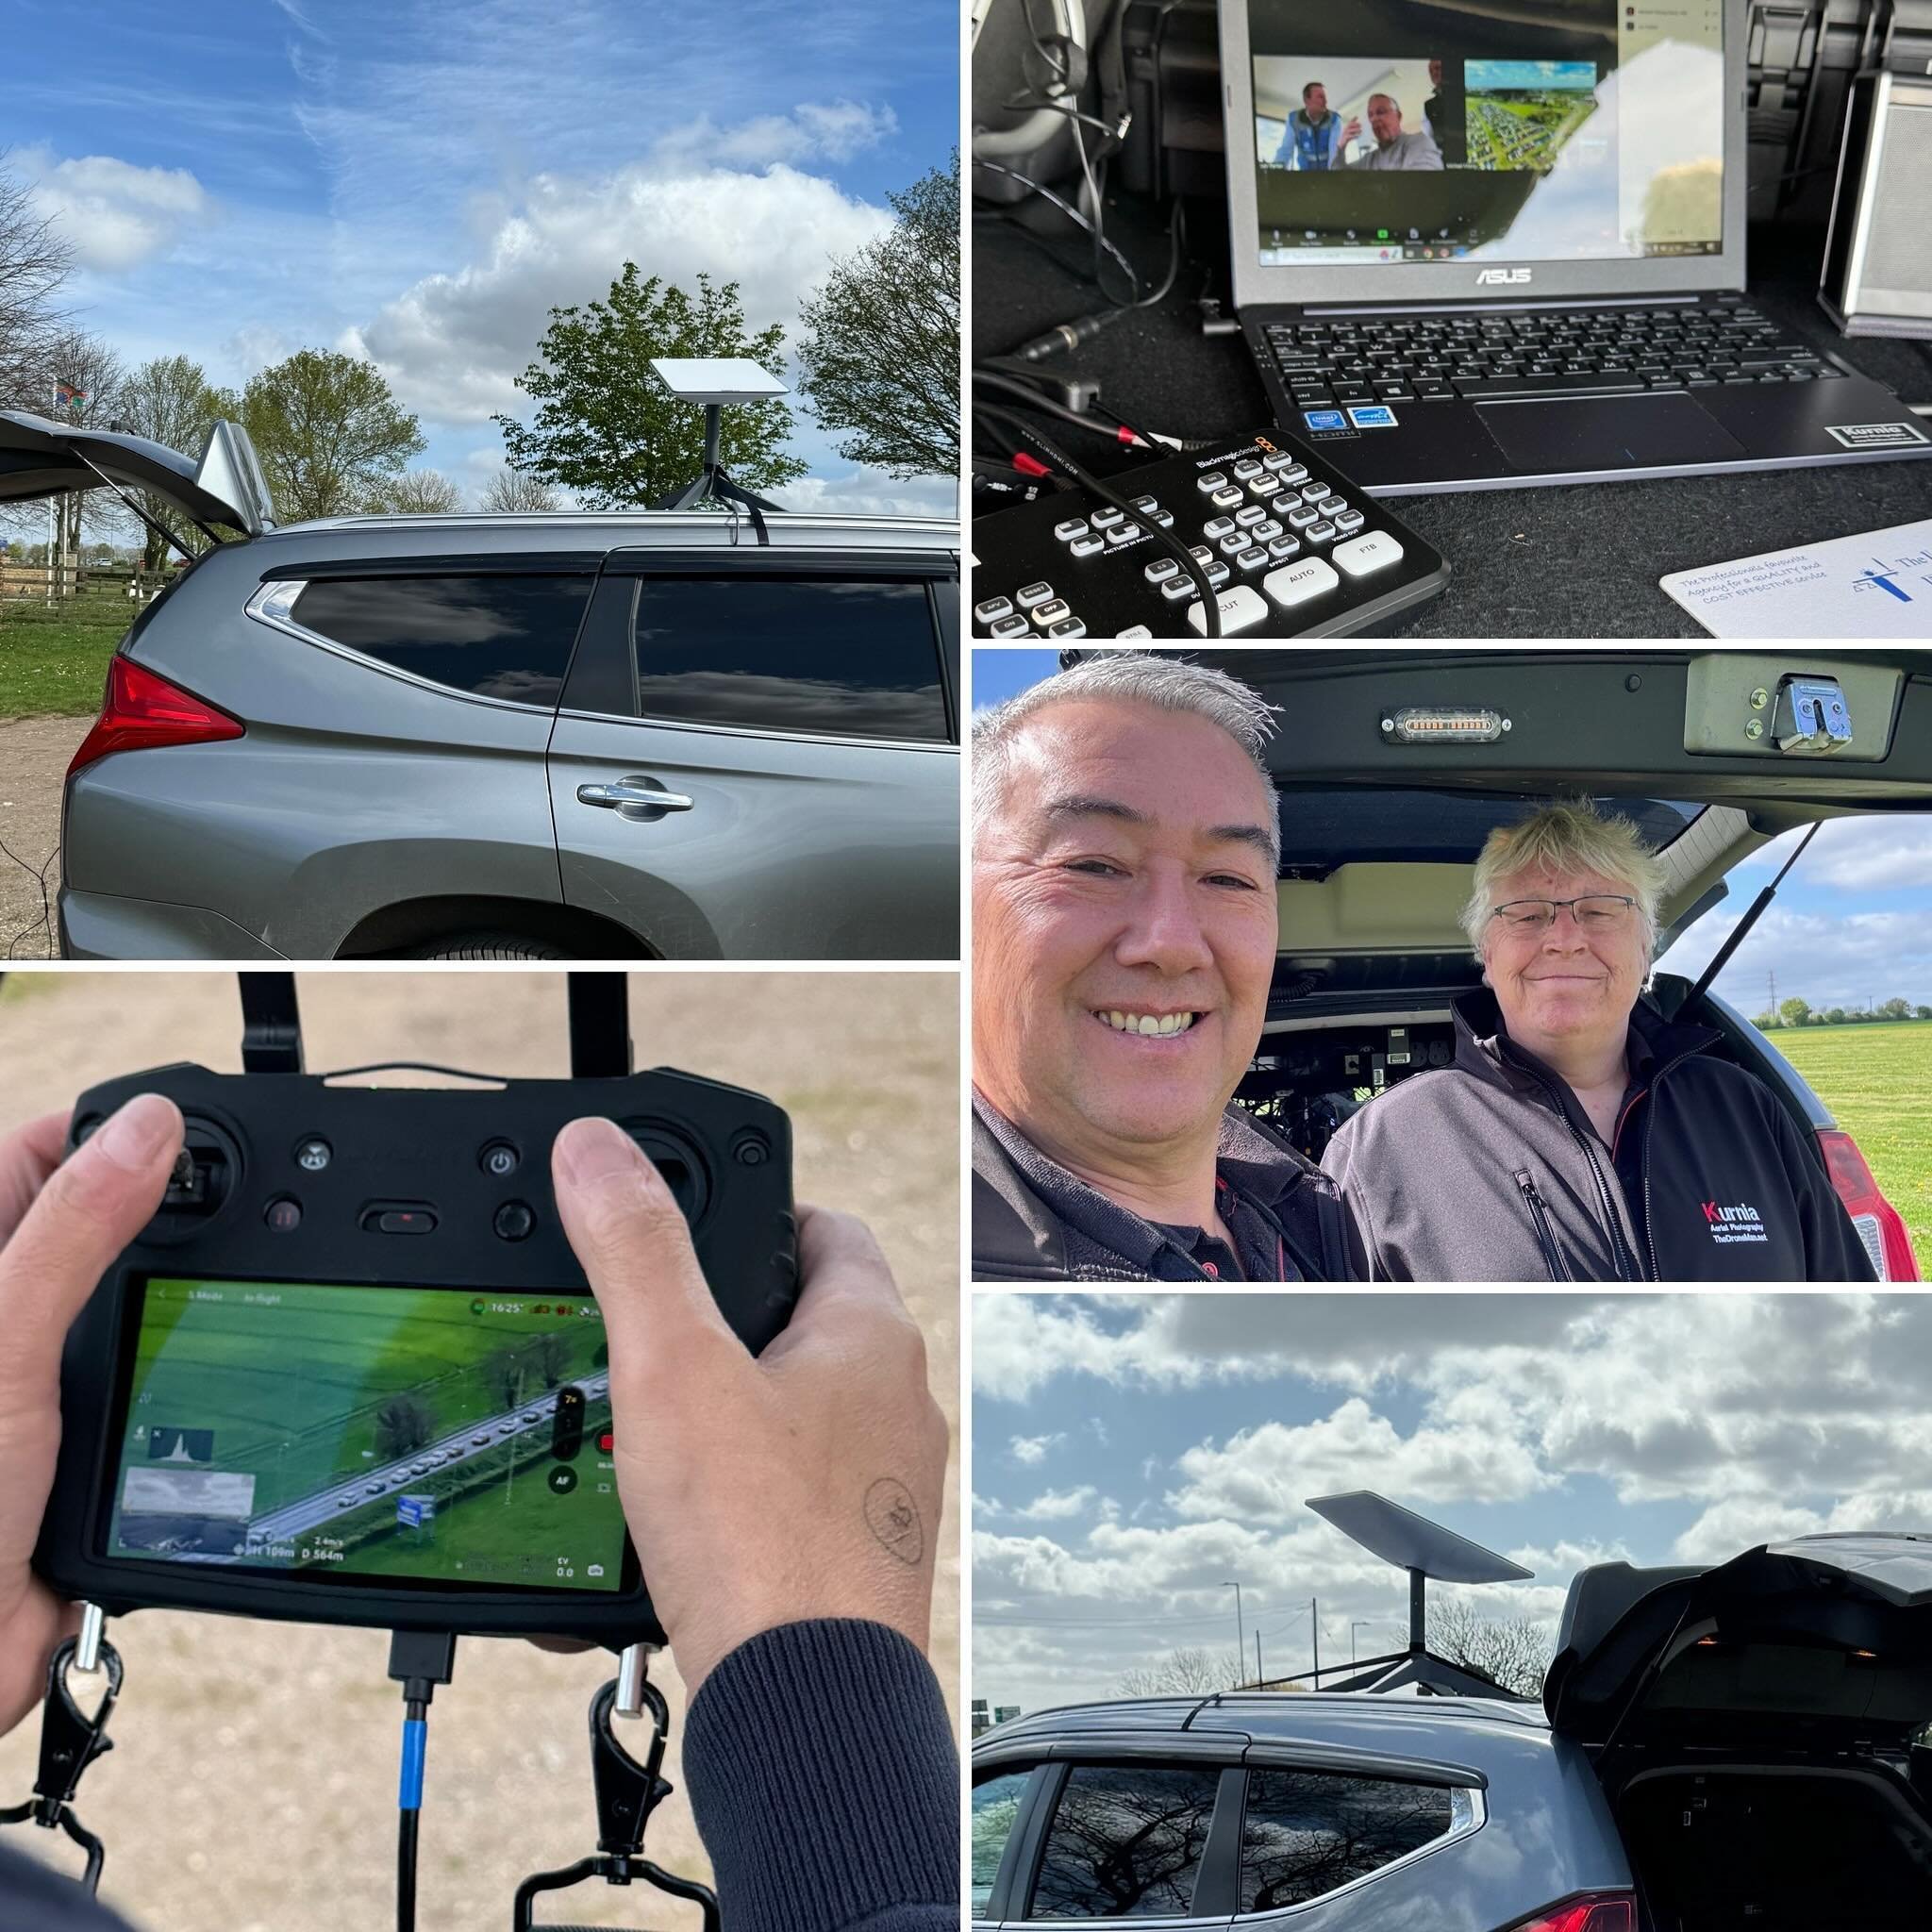 Providing some live drone monitoring today at Lincolnshire Showground. We have a self contained setup with our own 240v onboard supply and Starlink connection for fast uniterupted internet with latency of less than 1 sec. If you need live monitoring 